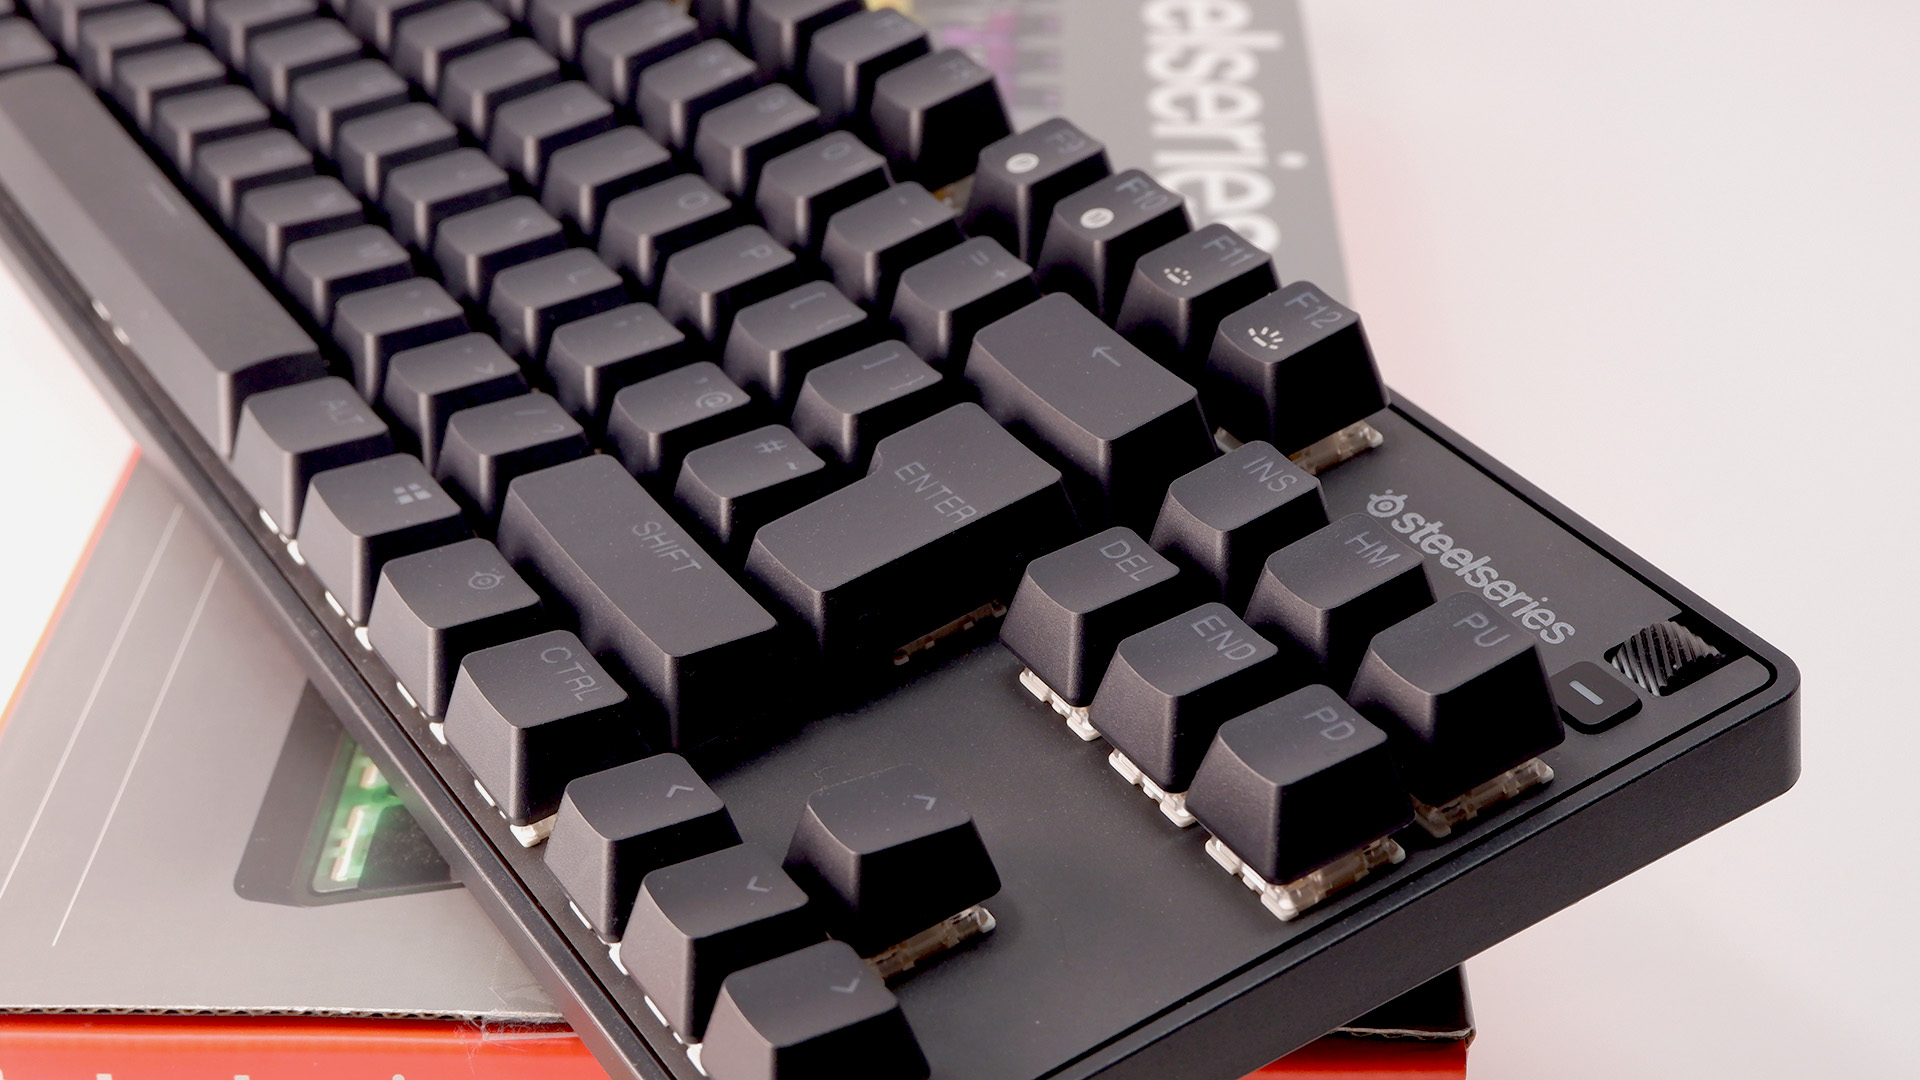 SteelSeries Apex 9 TKL gaming keyboard pictured on the box.